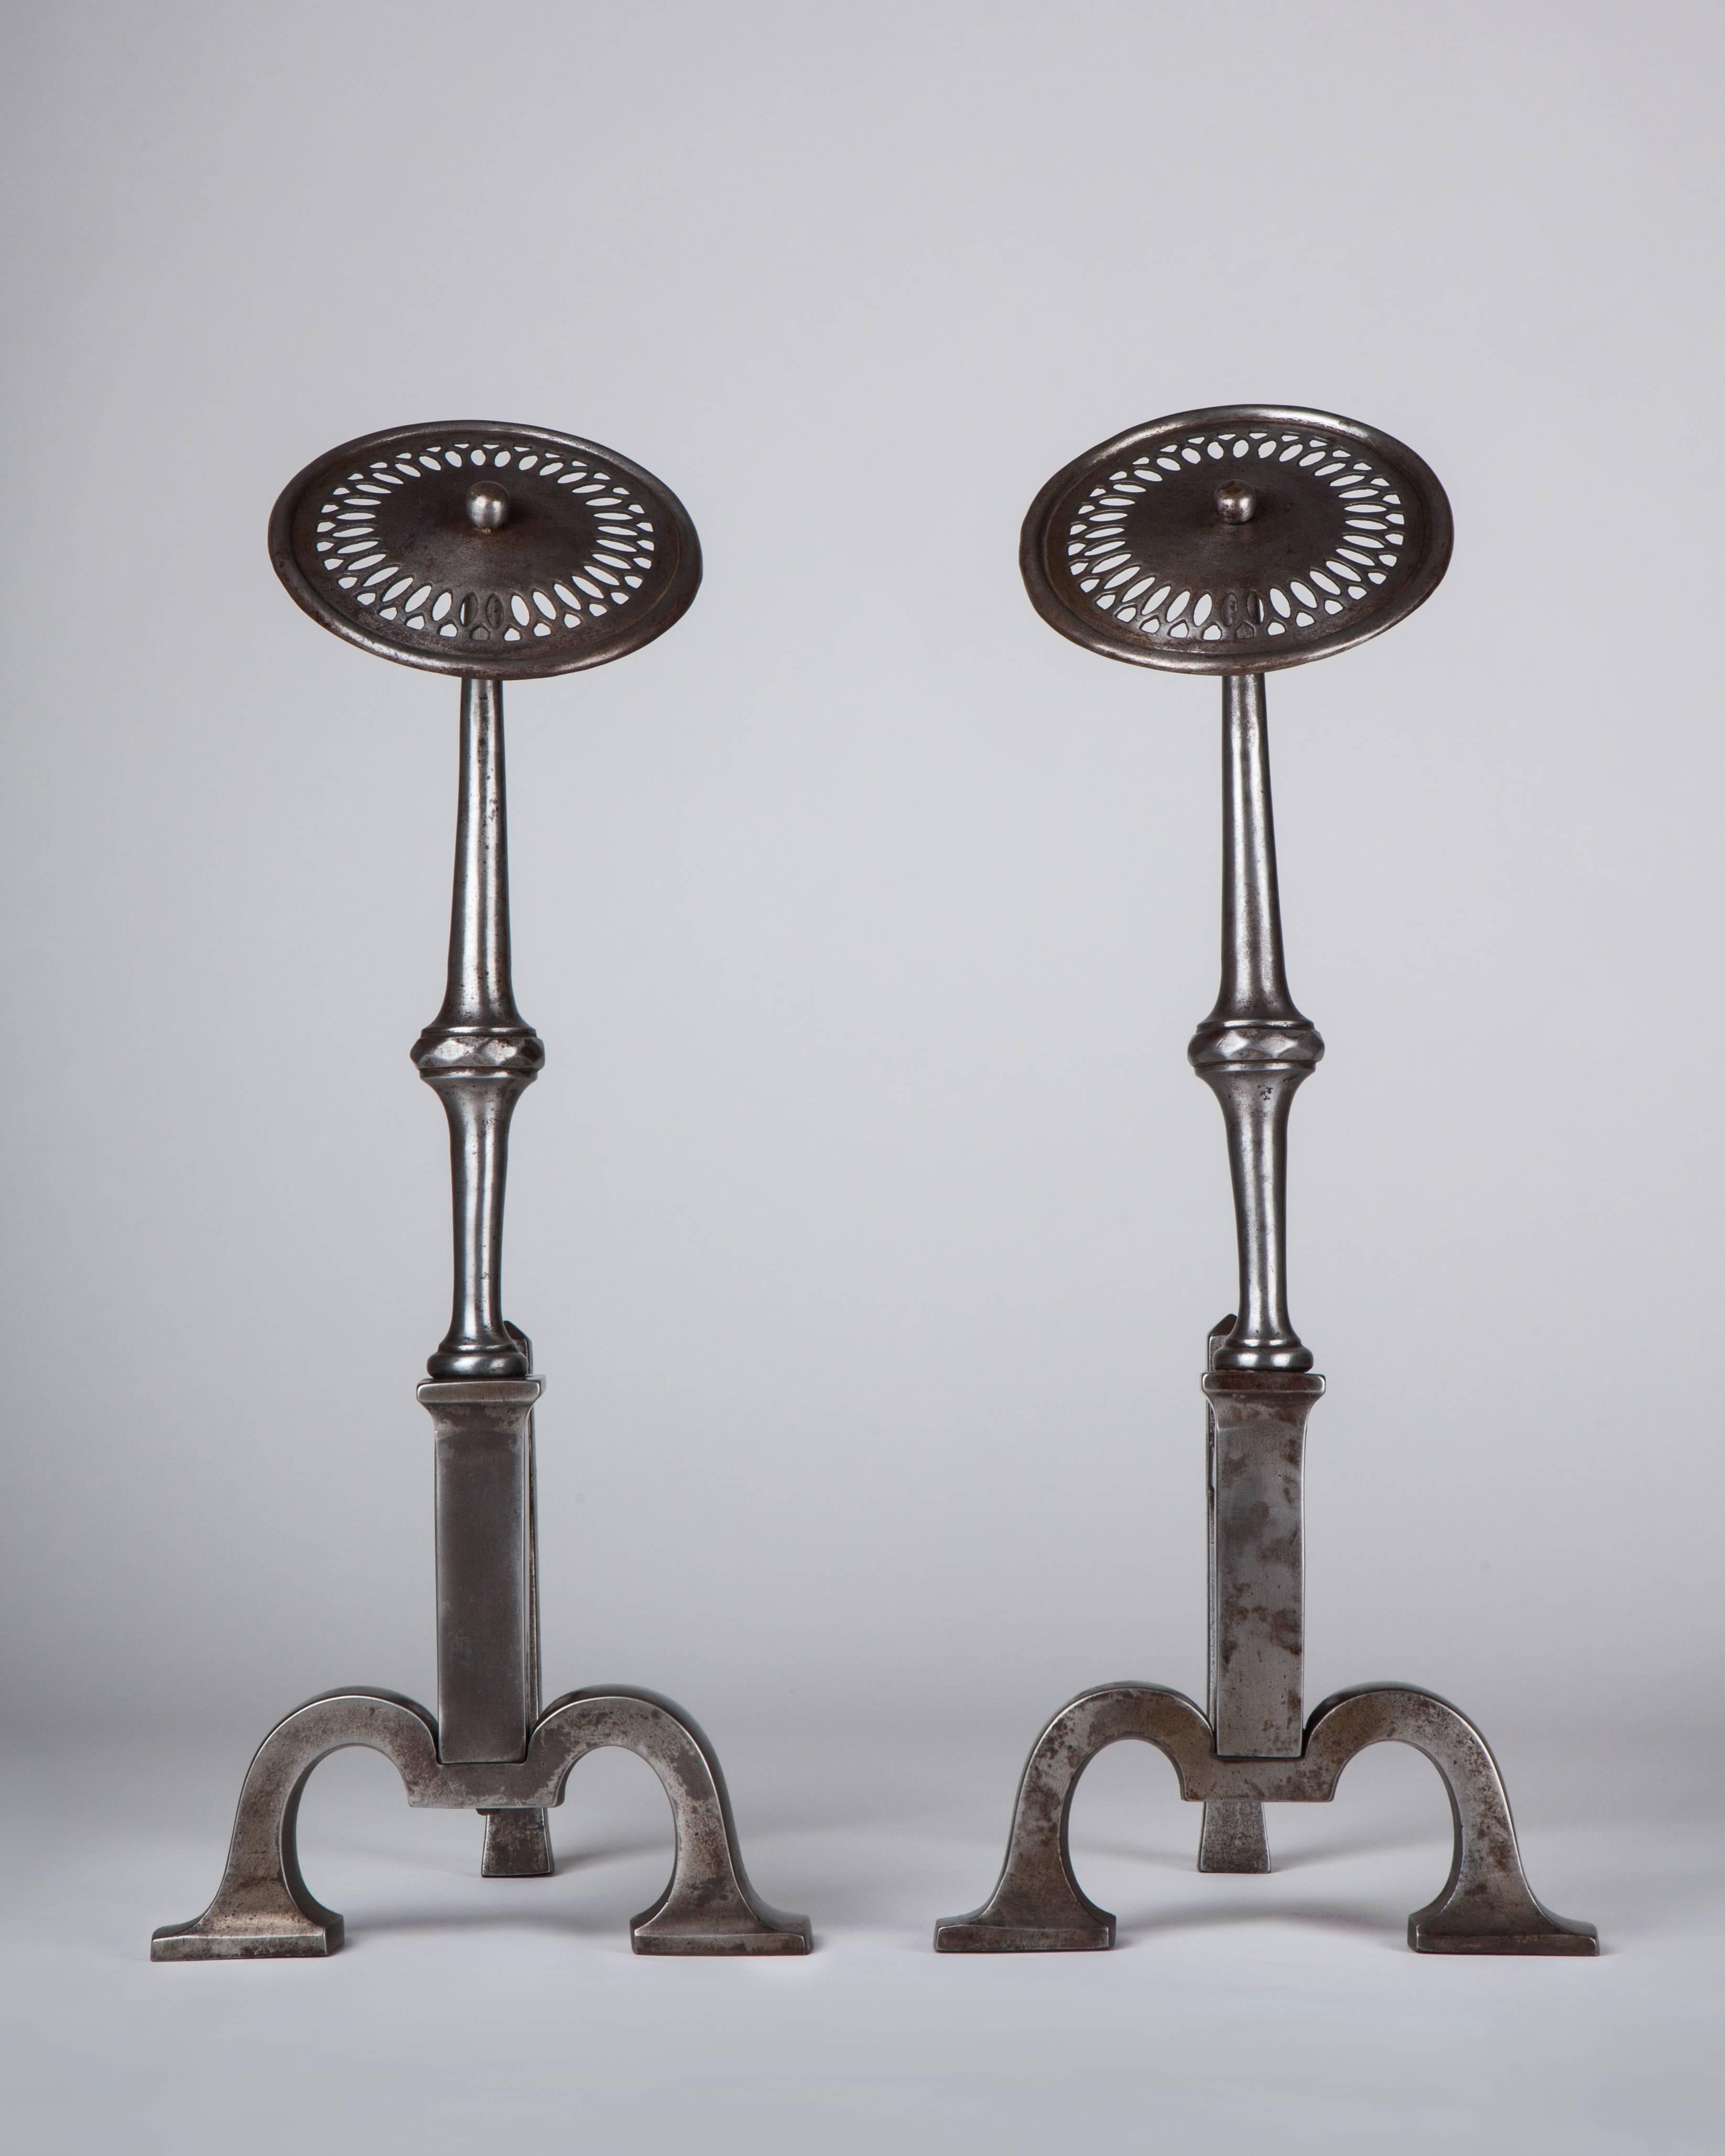 AFP0552
A pair of wrought iron andirons with flat pierced circular finials and forged bodies.

Dimensions:
Overall: 17